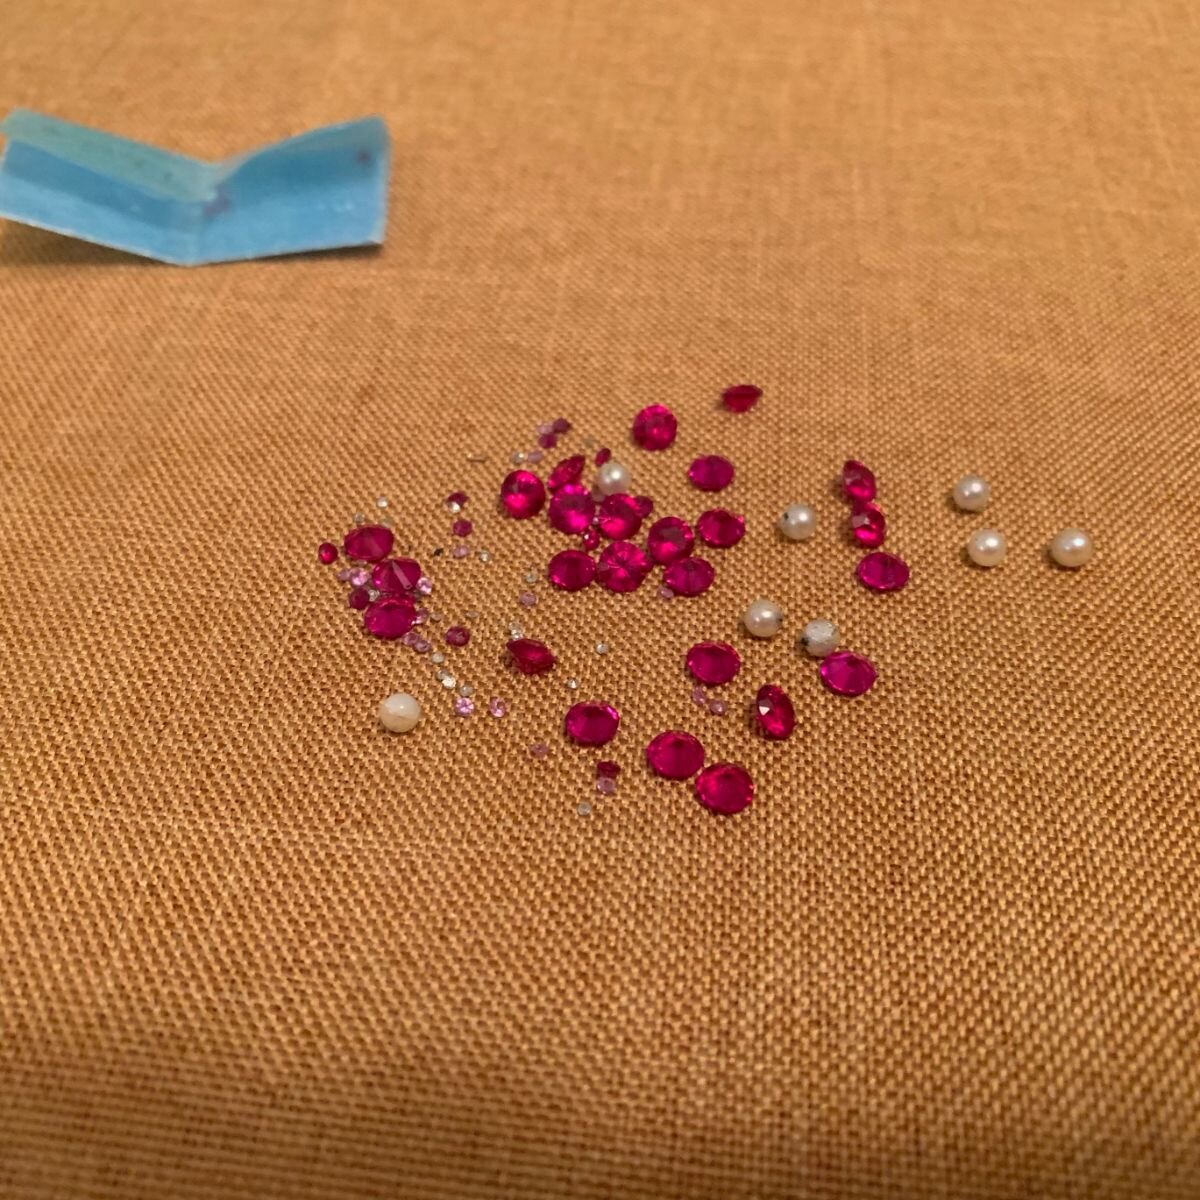 Rubies, Diamonds, and Sapphires laid out for custom signet ring by JBJewels.jpeg